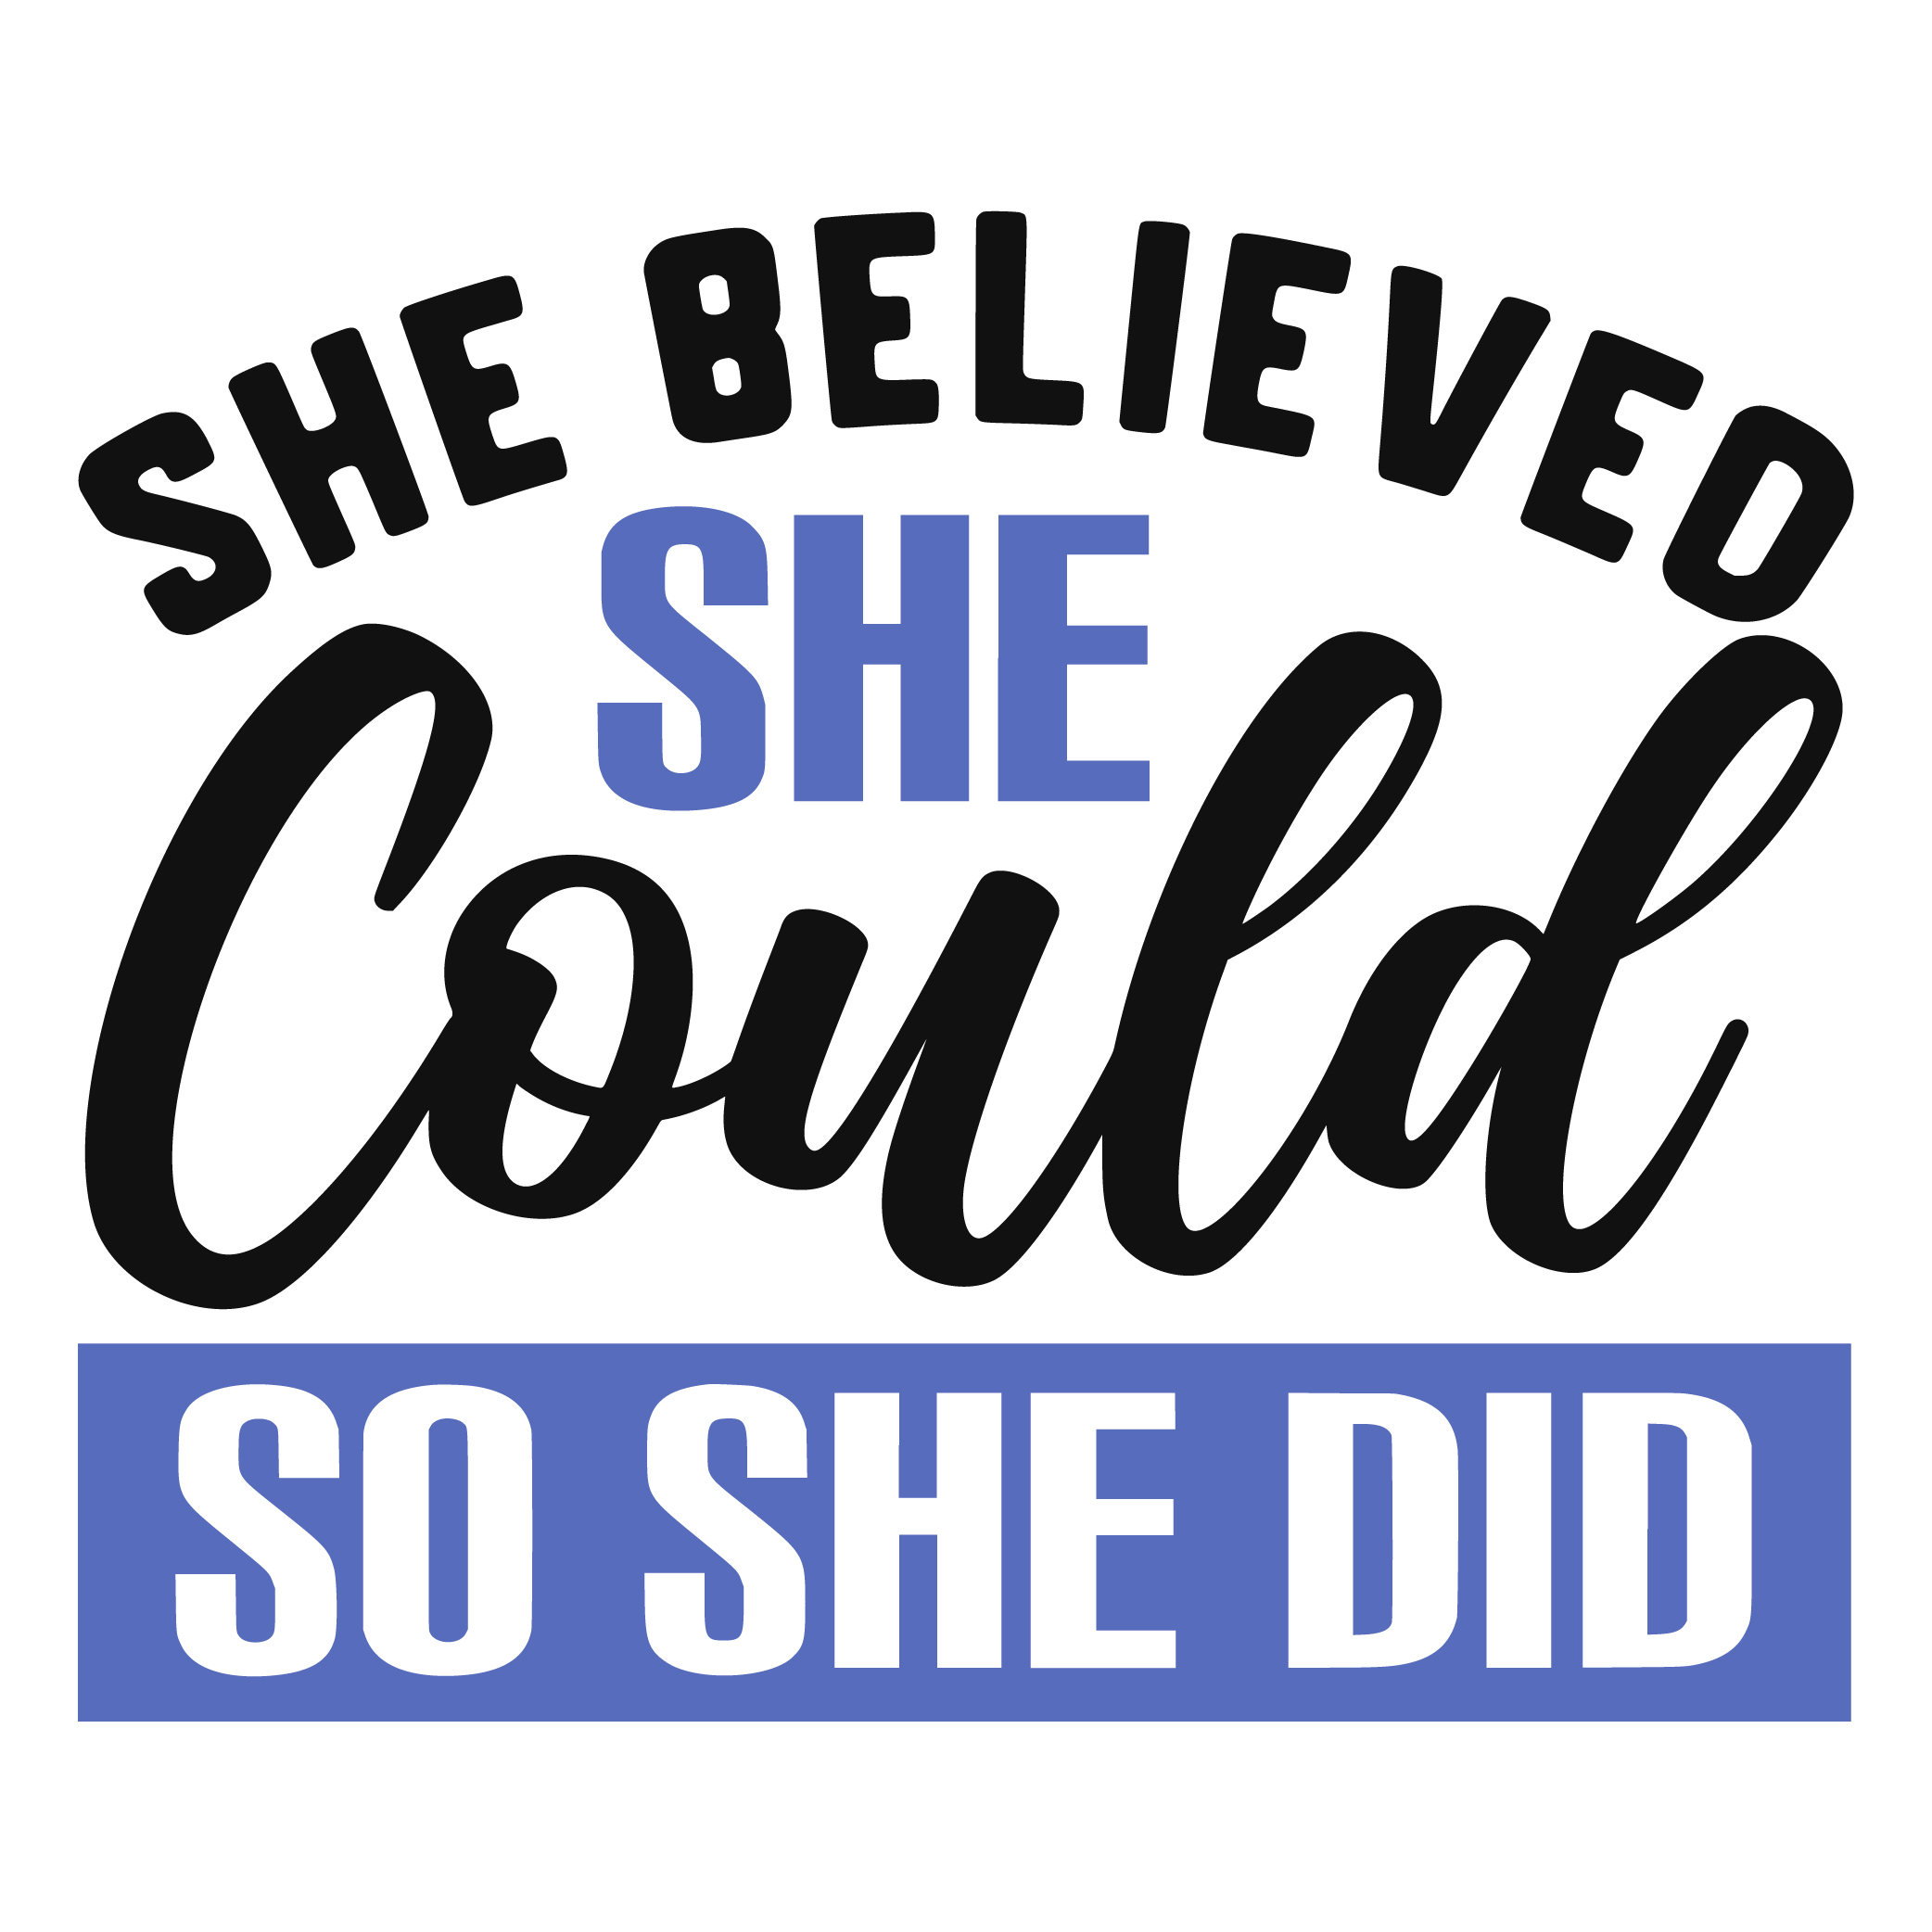 she believed she could so she did woman SVG Boss Lady  Black Lives Matter  Lady Woman Diva Tshirt Cut File Cricut Silhouette Women Empowerment svg Feminism svg Girl Power 